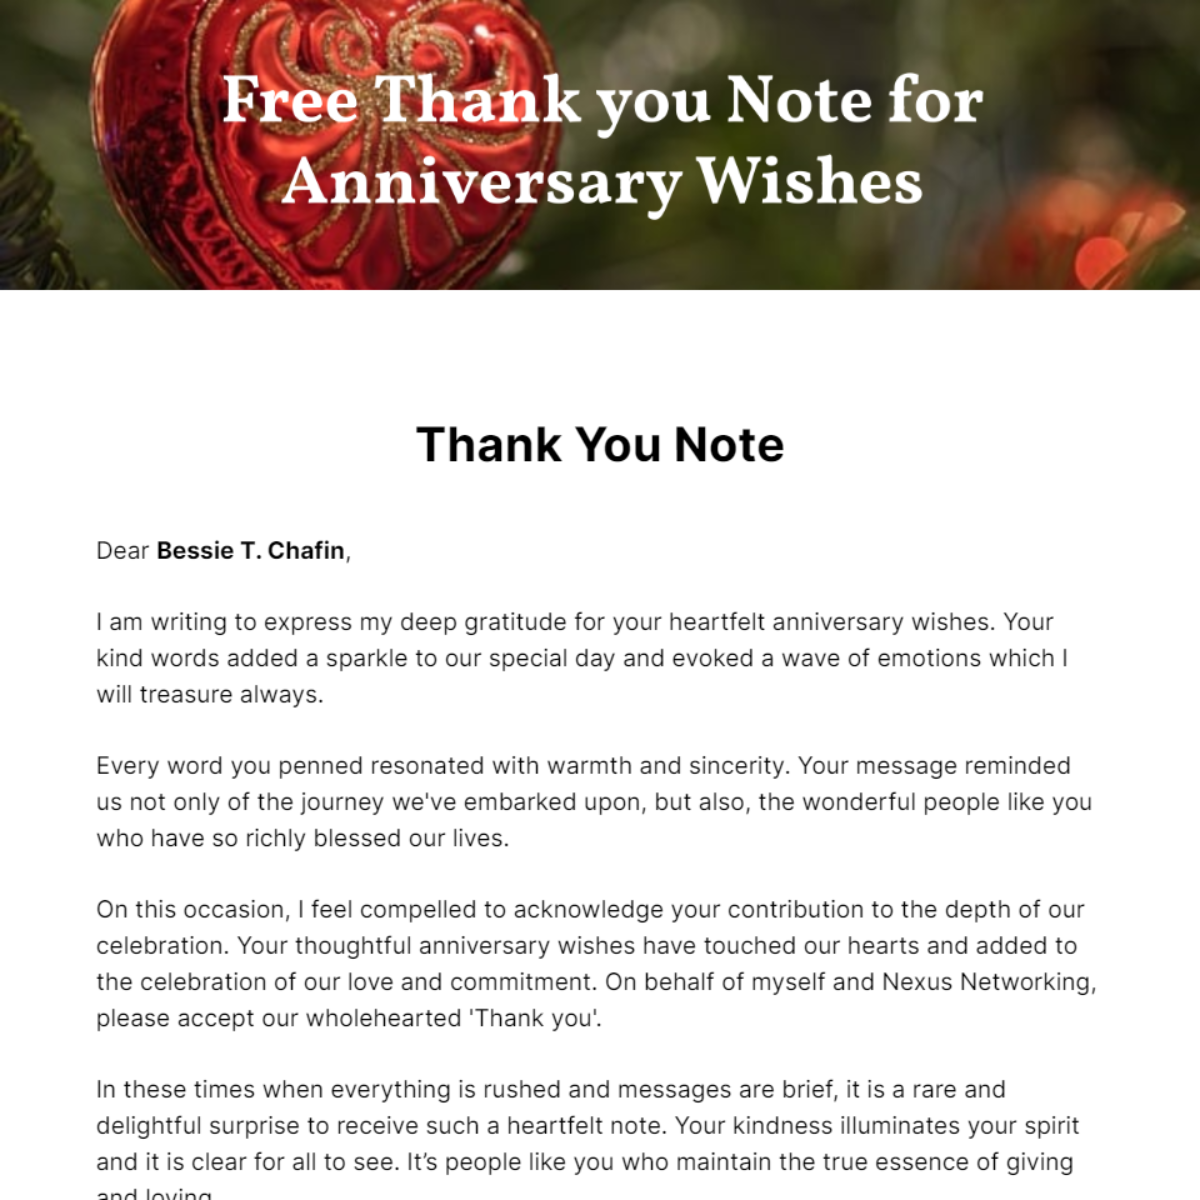 Thank you Note for Anniversary Wishes Template